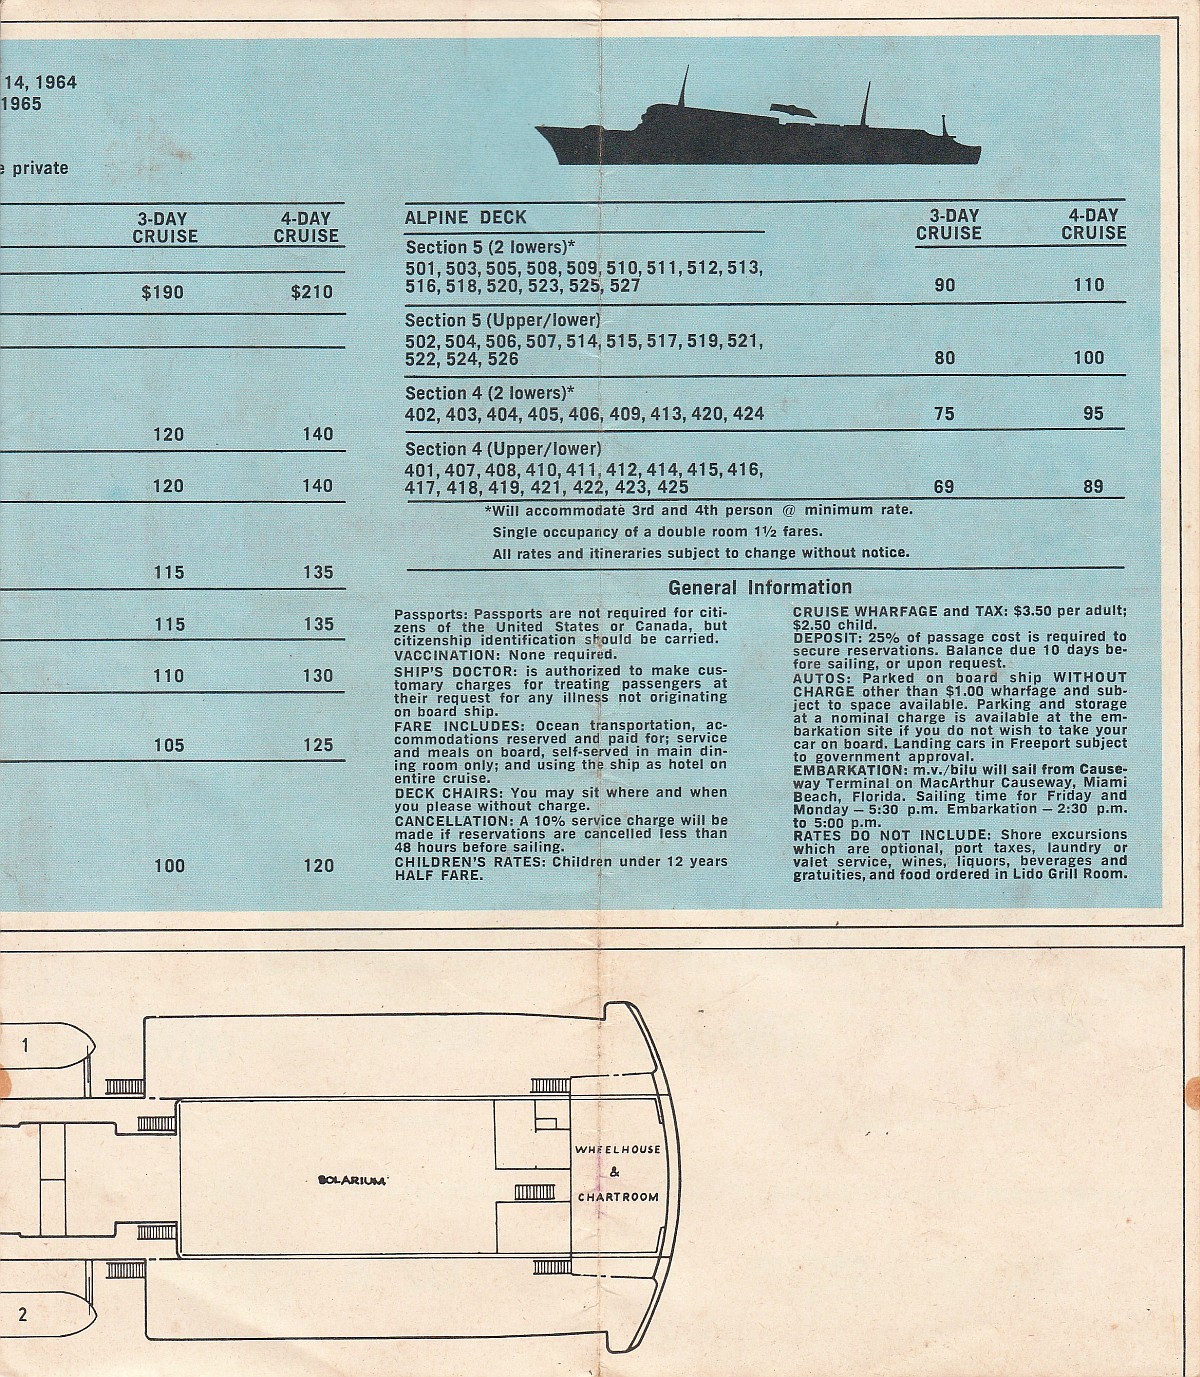 mv Bilu Information and deck plan (cont'd): Rates and deck plan (continued)